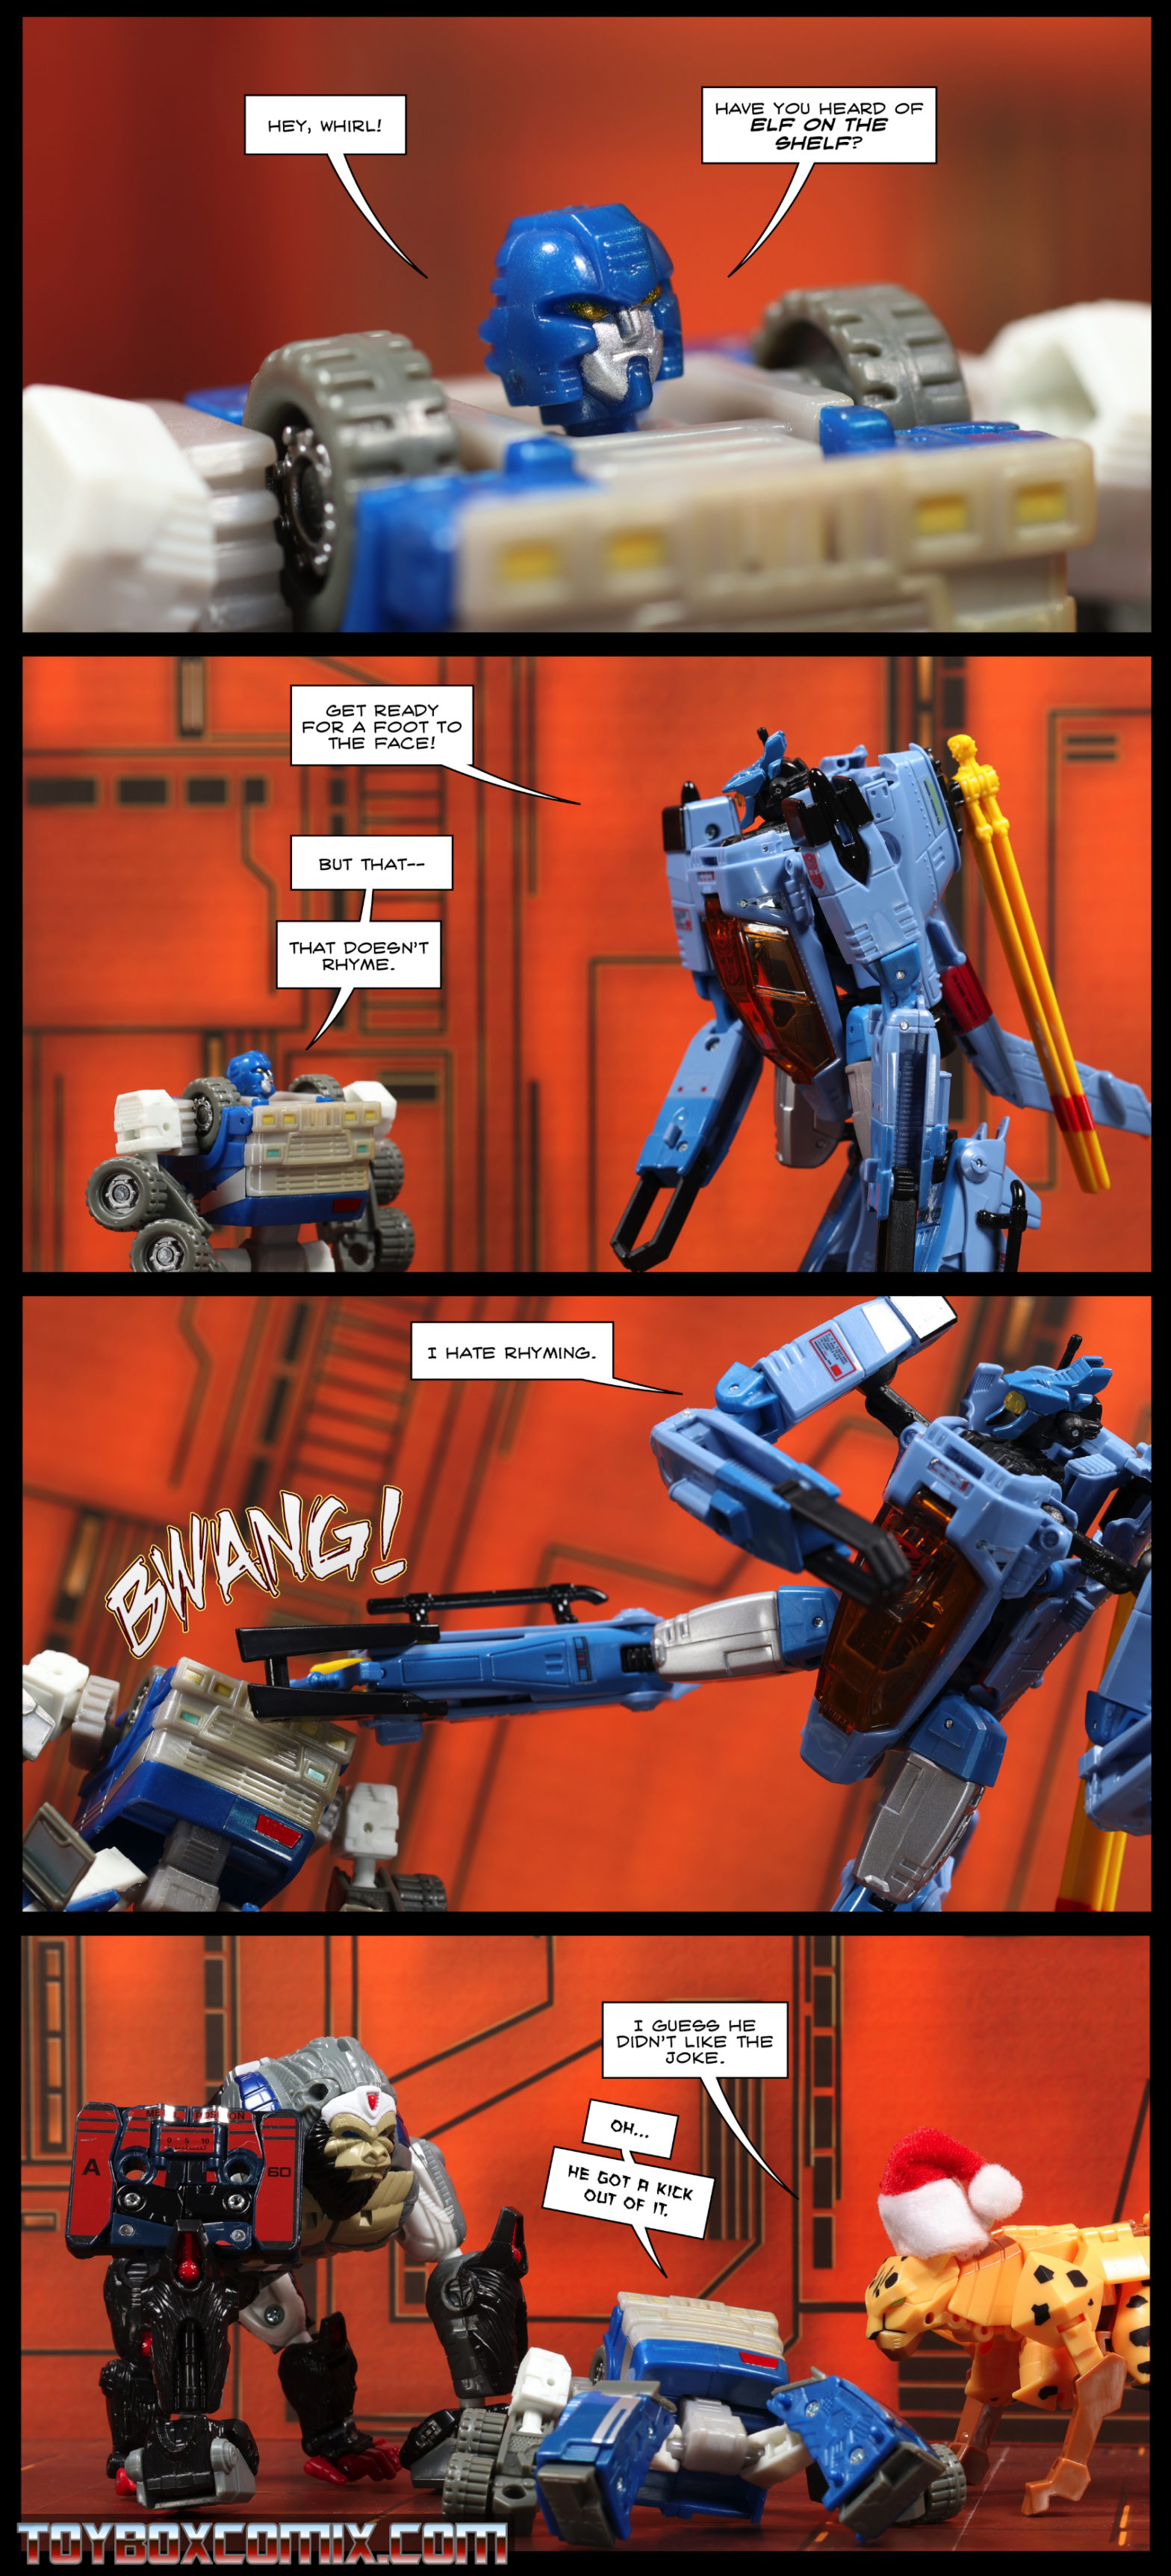 Location: Autobot base Panel 1: Armorhide: “Hey, Whirl! Have you heard of Elf on the Shelf?” 2: Whirl: “Get ready for a foot to the face!” Armorhide: “But that—that doesn’t rhyme.” 3: Whirl, kicking Armorhide in the face with a BWANG: “I hate rhyming.” 4: Optimus Primal, in ape mode, has Zaur, in tape mode. Cheetor, in beast mode, wearing a Santa hat: “I guess he didn’t like the joke.” Armorhode, laying on his back: “Oh…he got a kick out of it.”